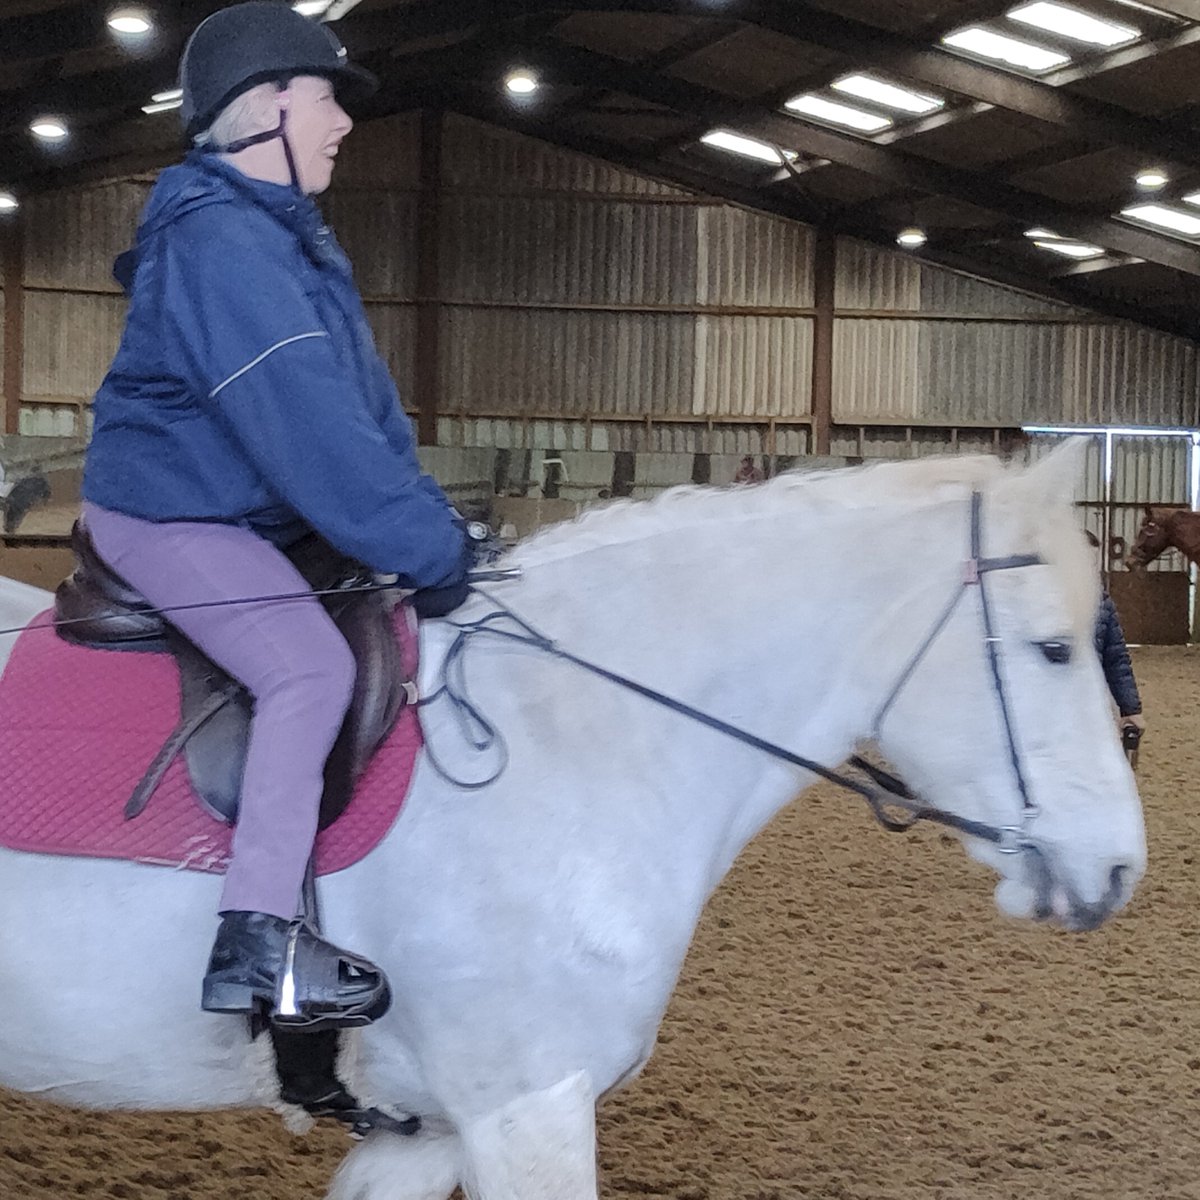 An amazing morning, reunited with my Willow for the first time in a year. She went like a dream, and even remembered bits of our dressage tests. She still likes dancing to Meat Loaf! I might have cried at the end, cos it was so good to be back on board my dream horse xx